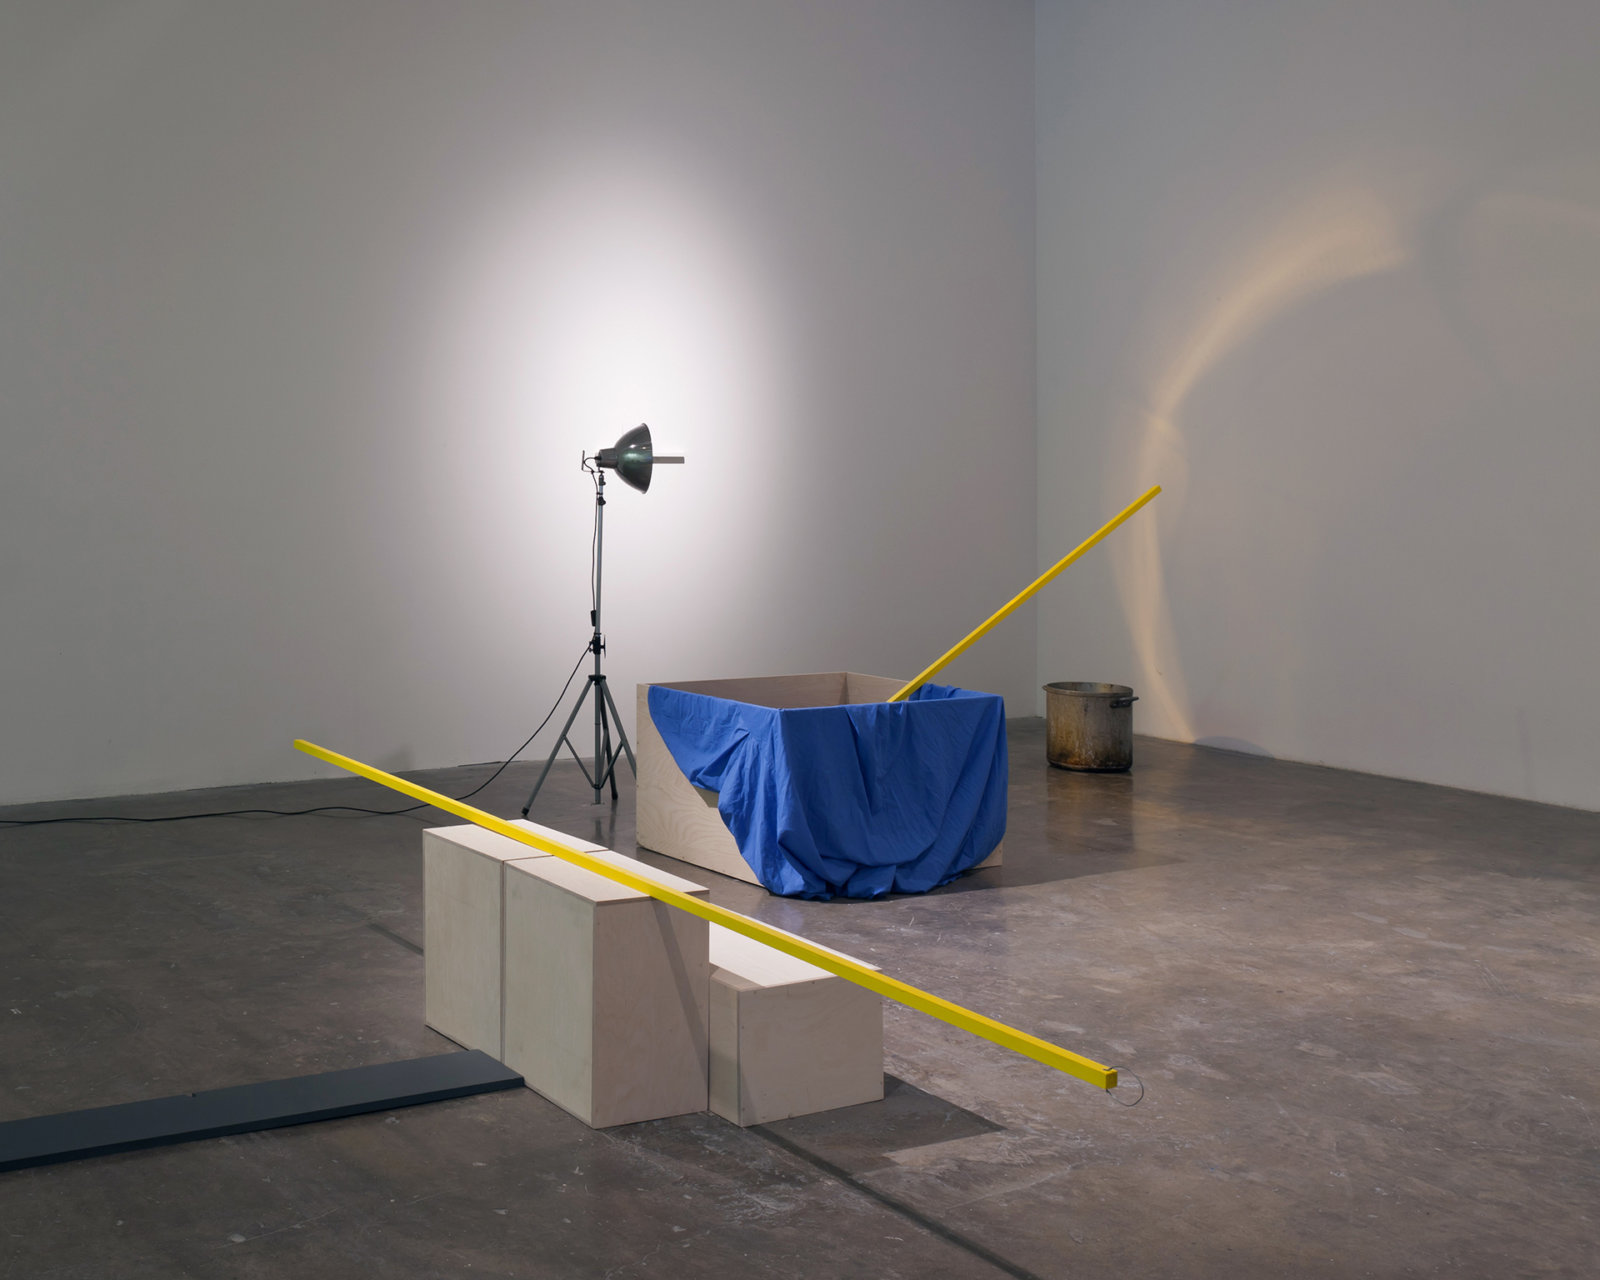 Geoffrey Farmer and Jeremy Millar, Mondegreen, 2011, variable components and dimensions. Installation view, Mondegreen, Projects Art Centre, Dublin, 2011